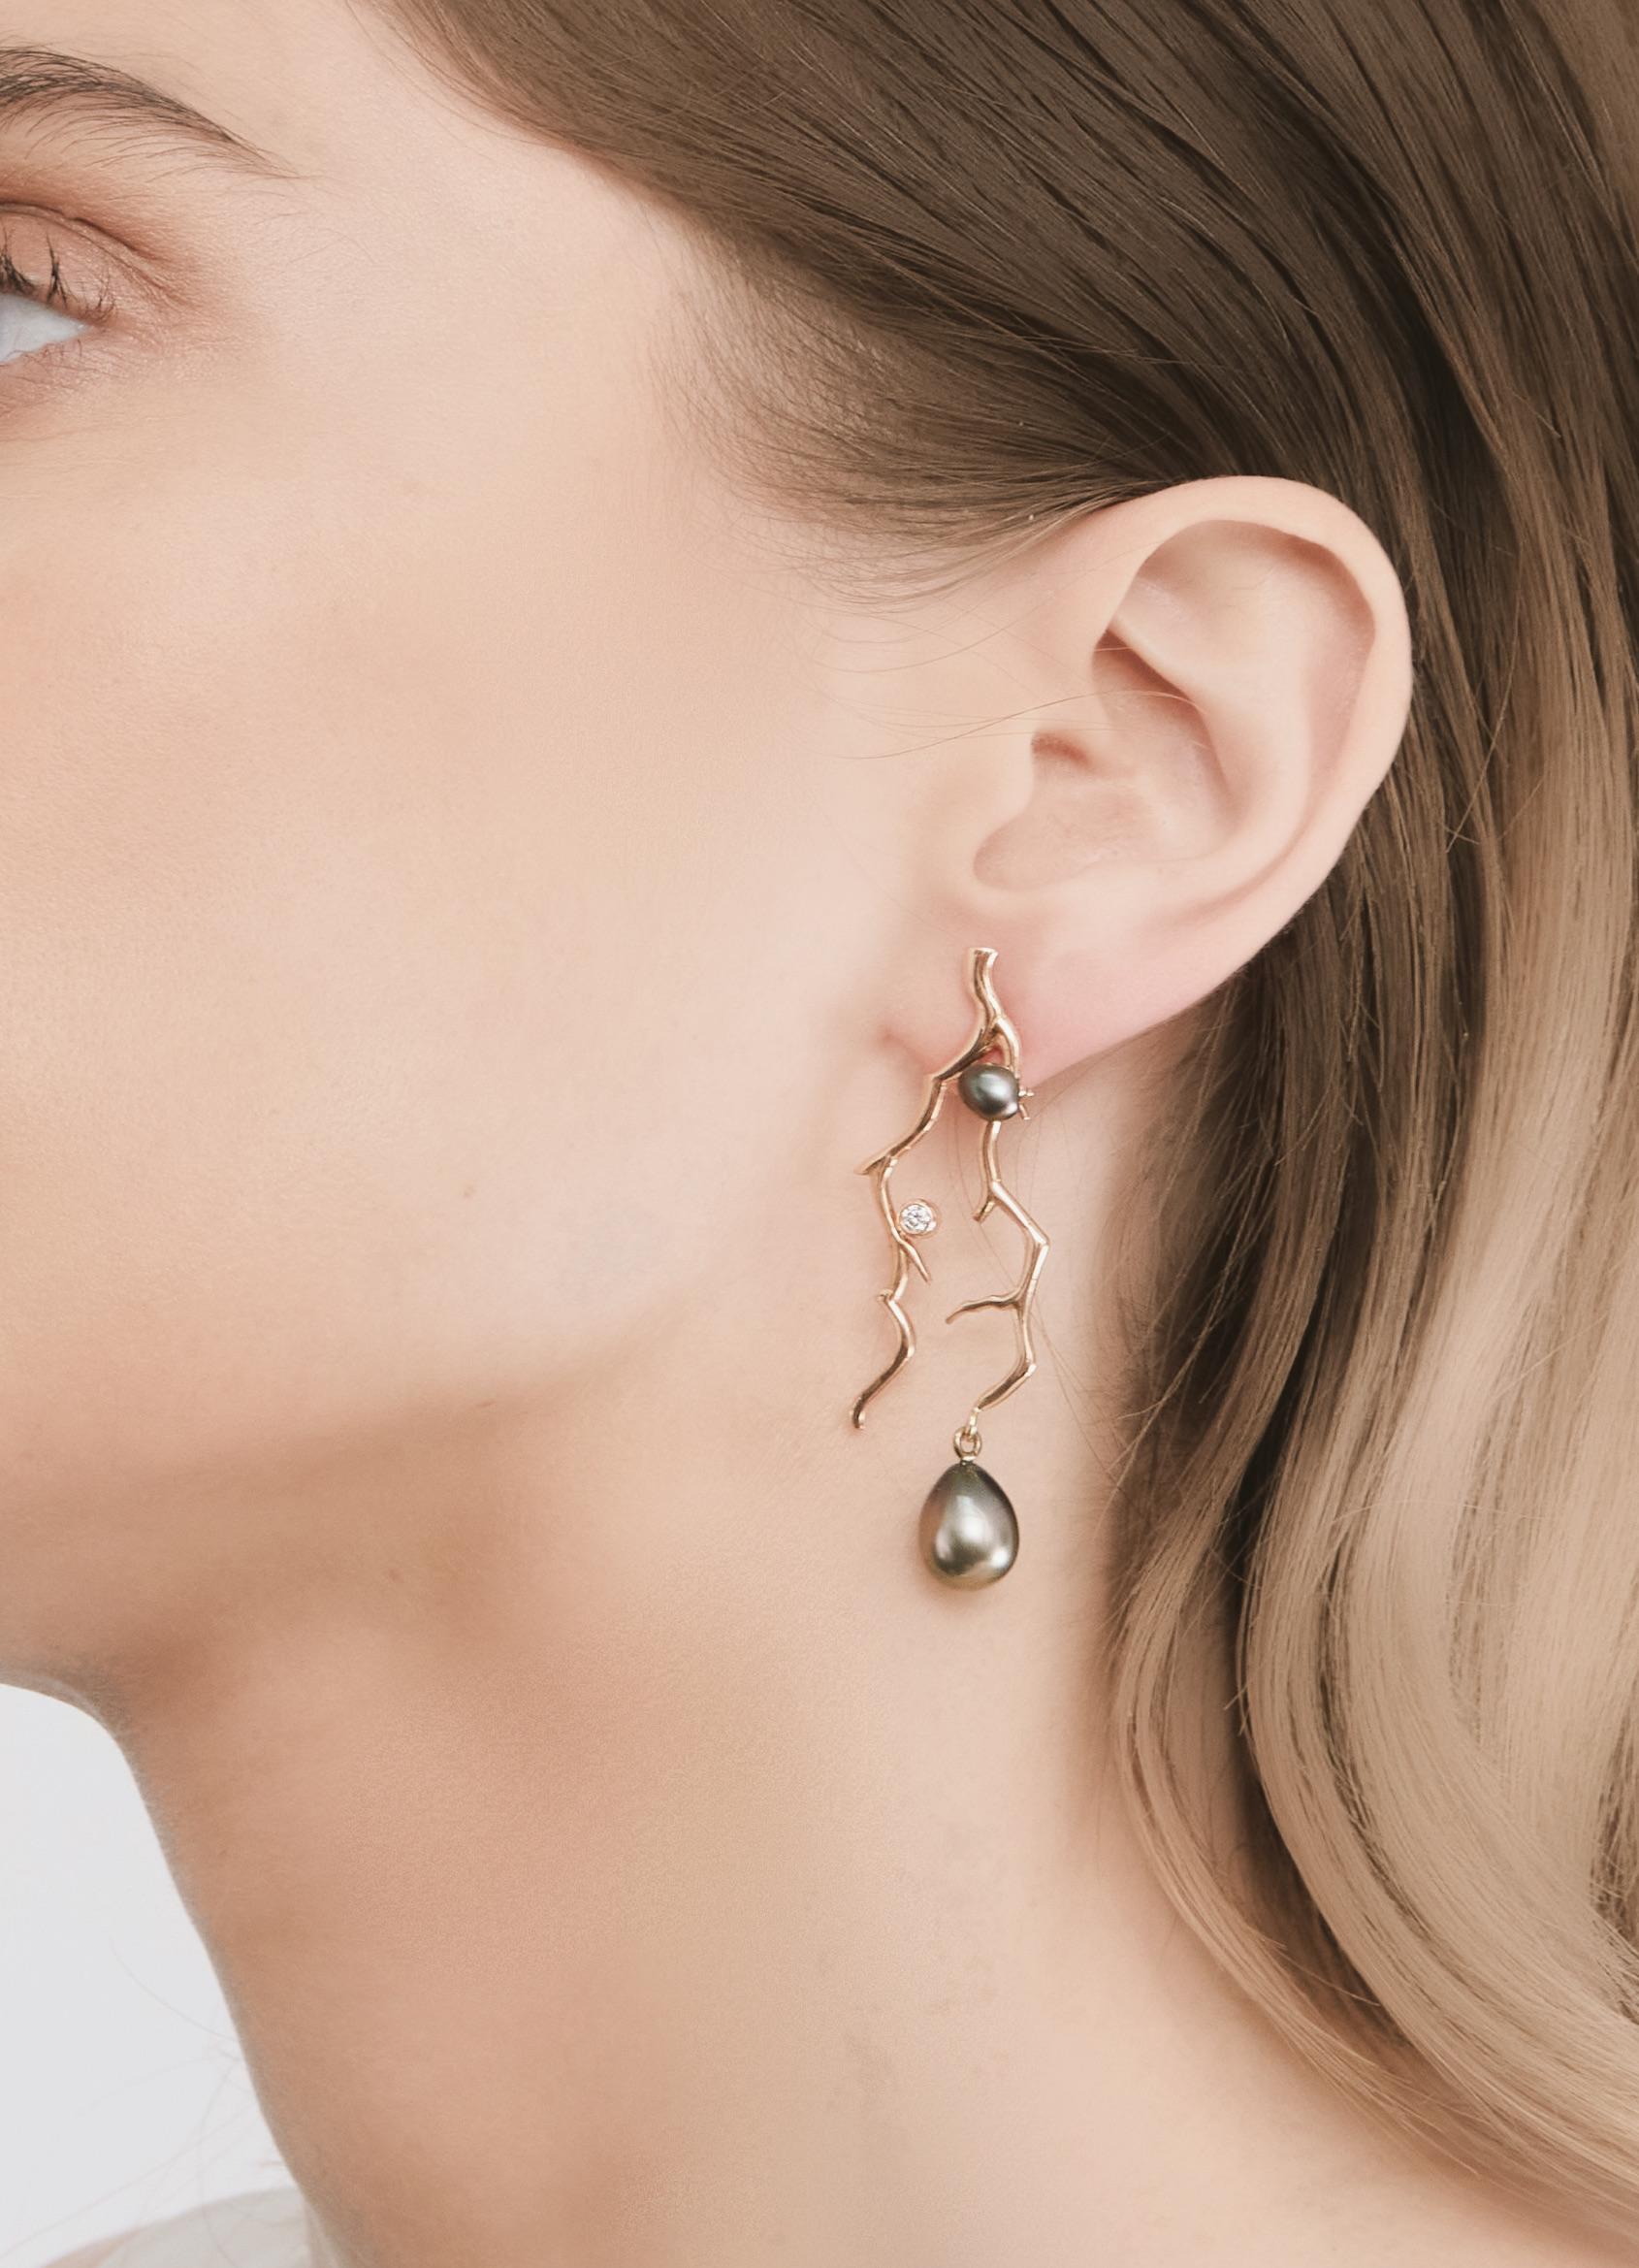 A Lily Hastedt Signature pair of chandelier earrings with Tahitian Black Pearls and Diamonds in 18 Karat rose Gold.  These earrings have an asymmetric design inspired by coral twigs and 'mirror' each other. The coral branches are embellished with